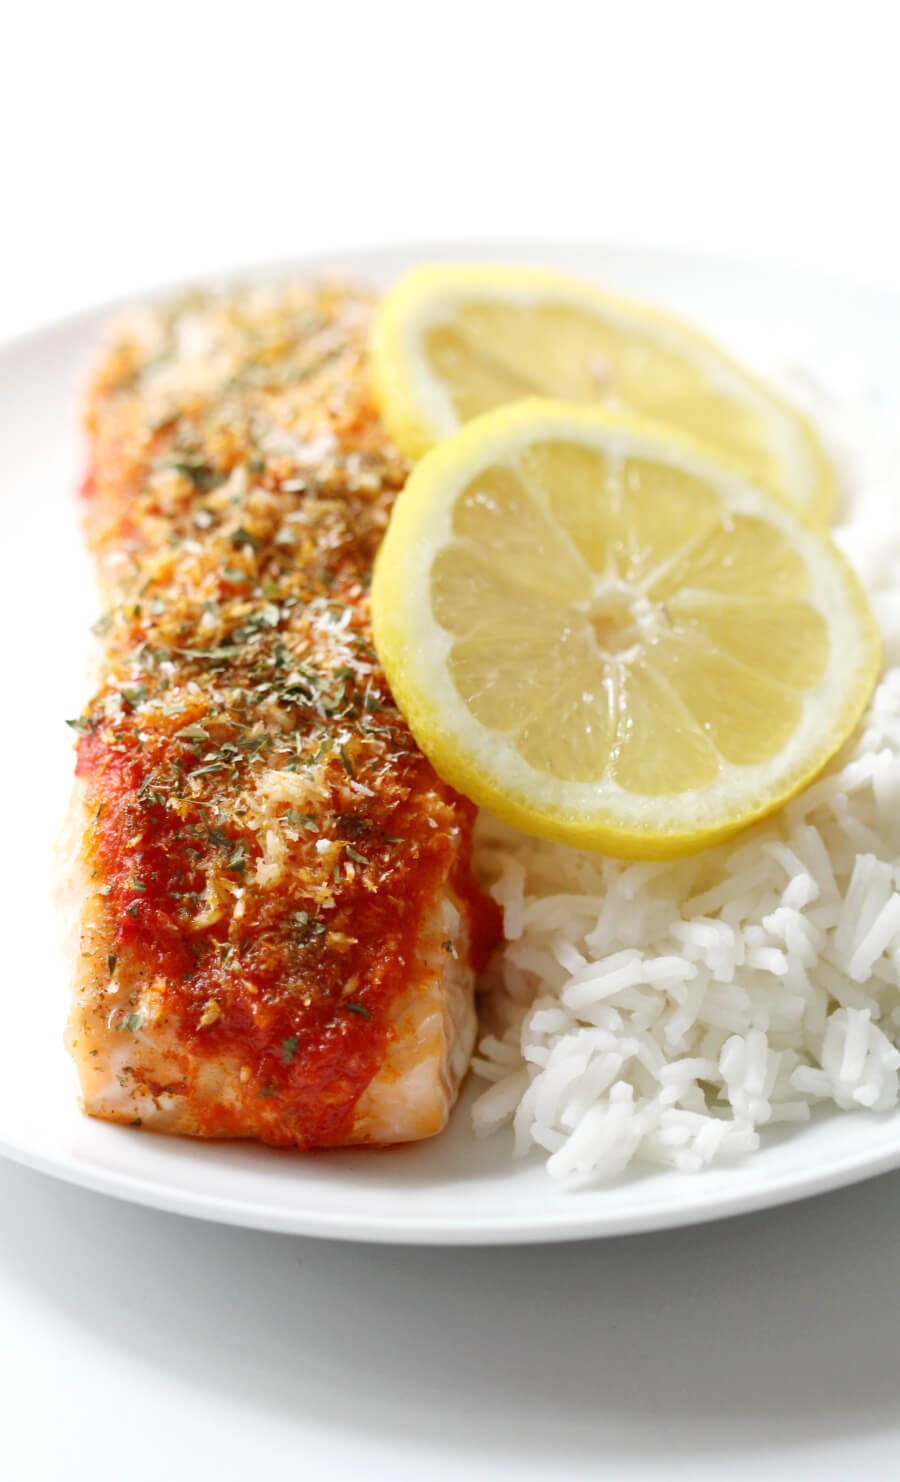 Harissa Salmon with Shredded Coconut on a plate with rice and lemon slices.